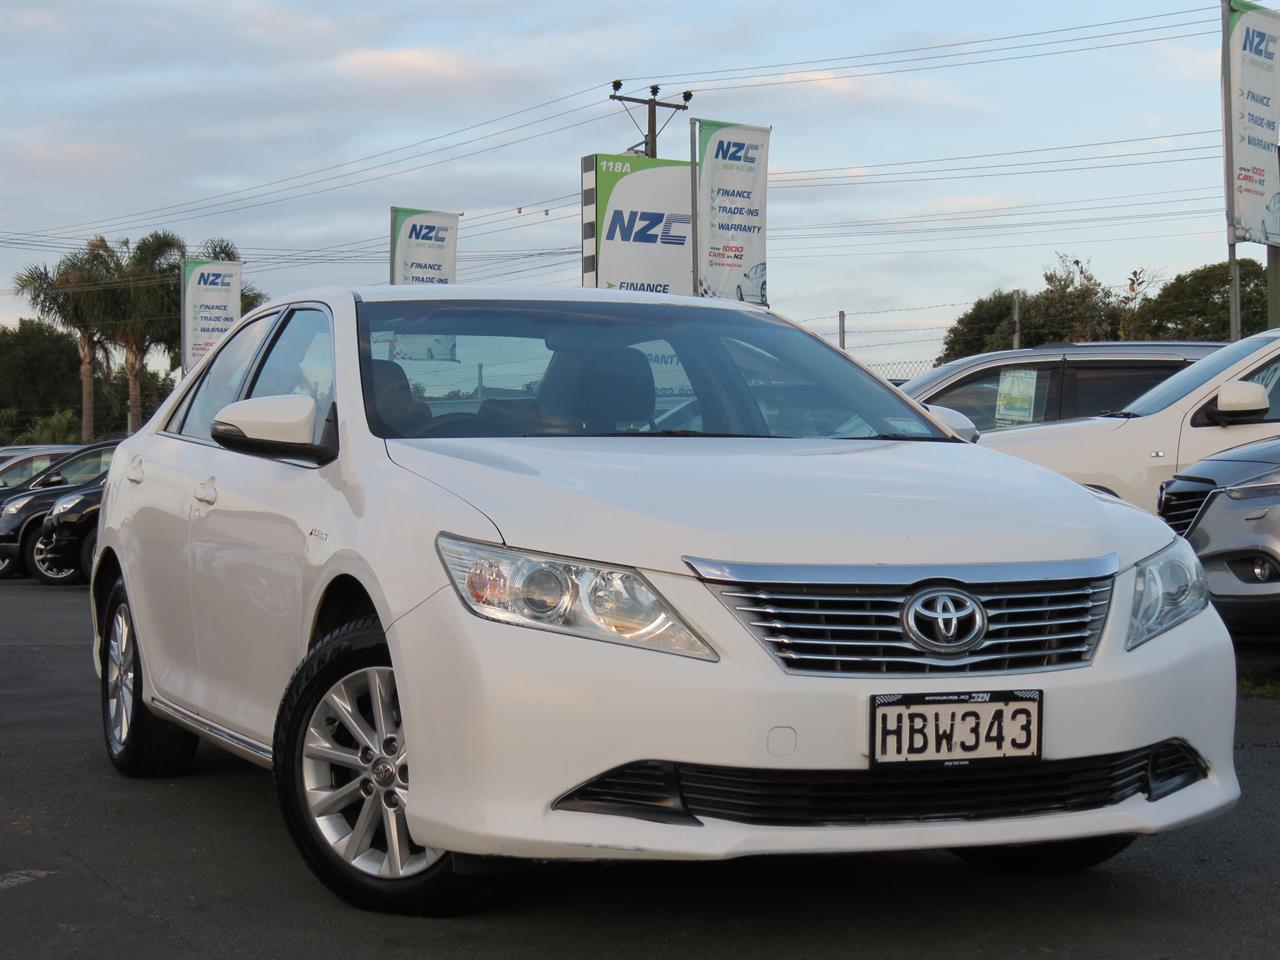 NZC 2013 Toyota Aurion just arrived to Auckland